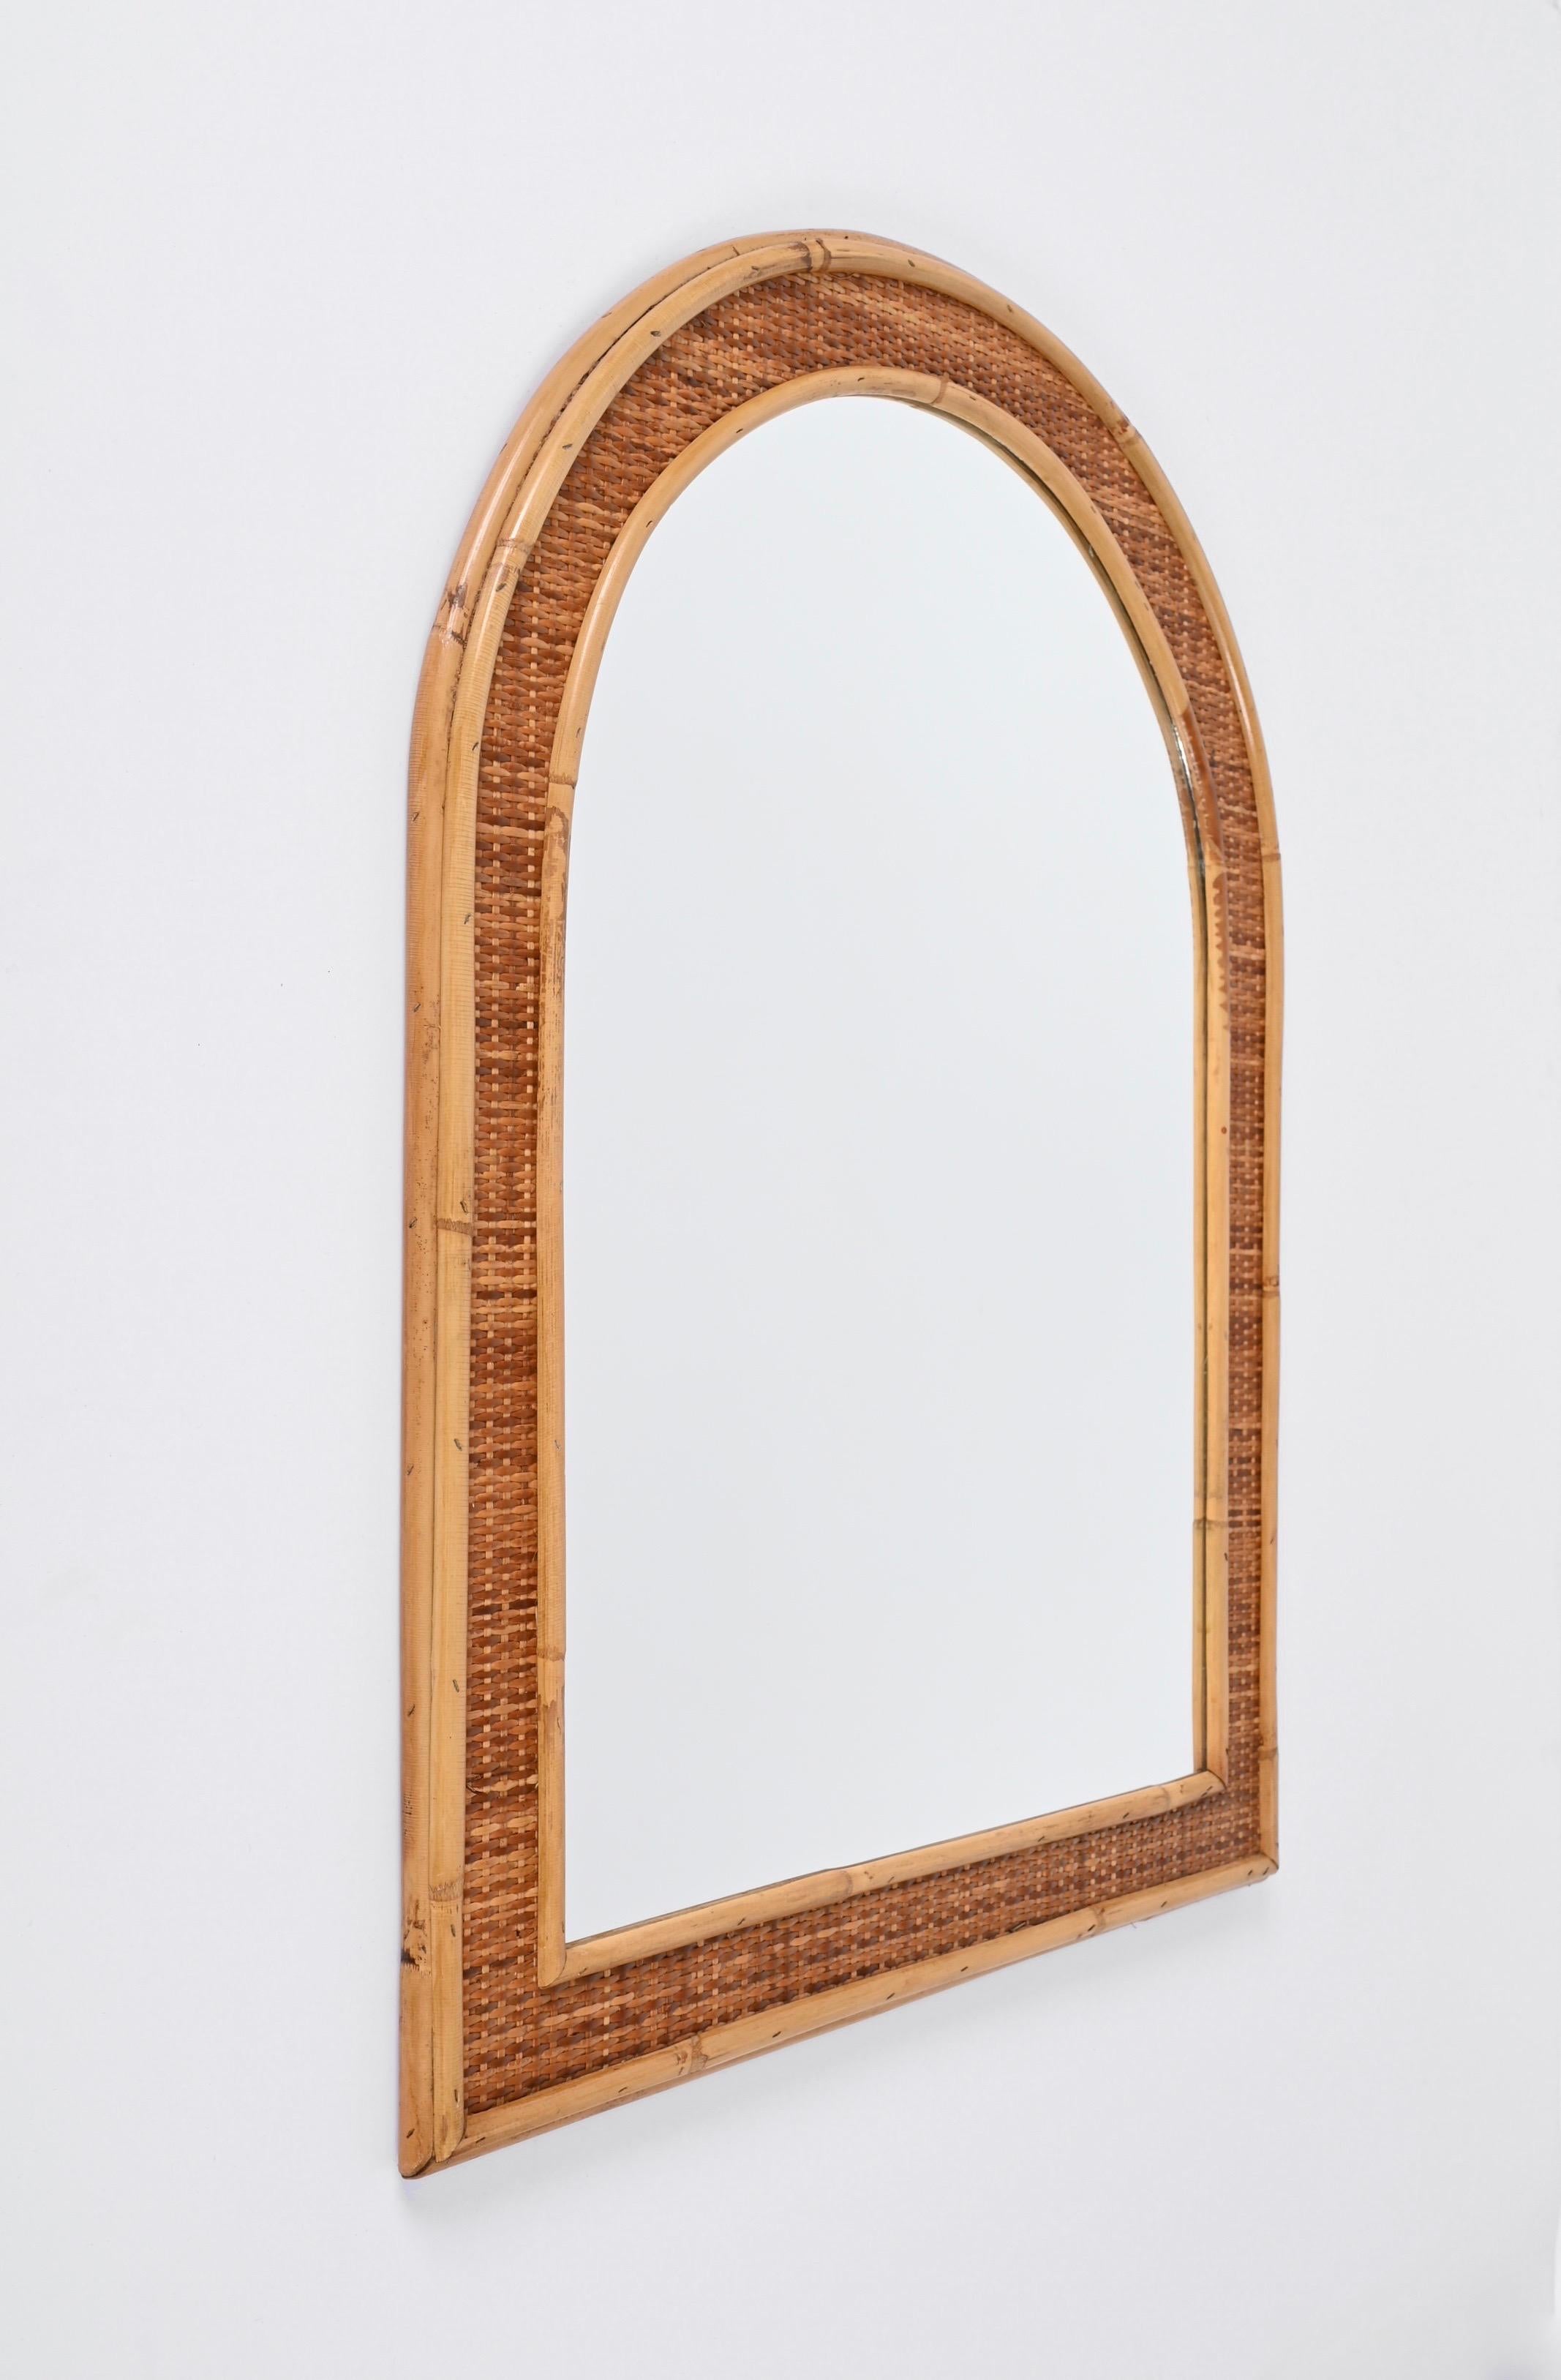 Spectacular mid-century arch shaped mirror in bamboo and woven wicker. This outstanding item was produced in Italy in the 1970s.
This piece is incredible due to its complex structure: it has an inner frame in bamboo a central part decorated with